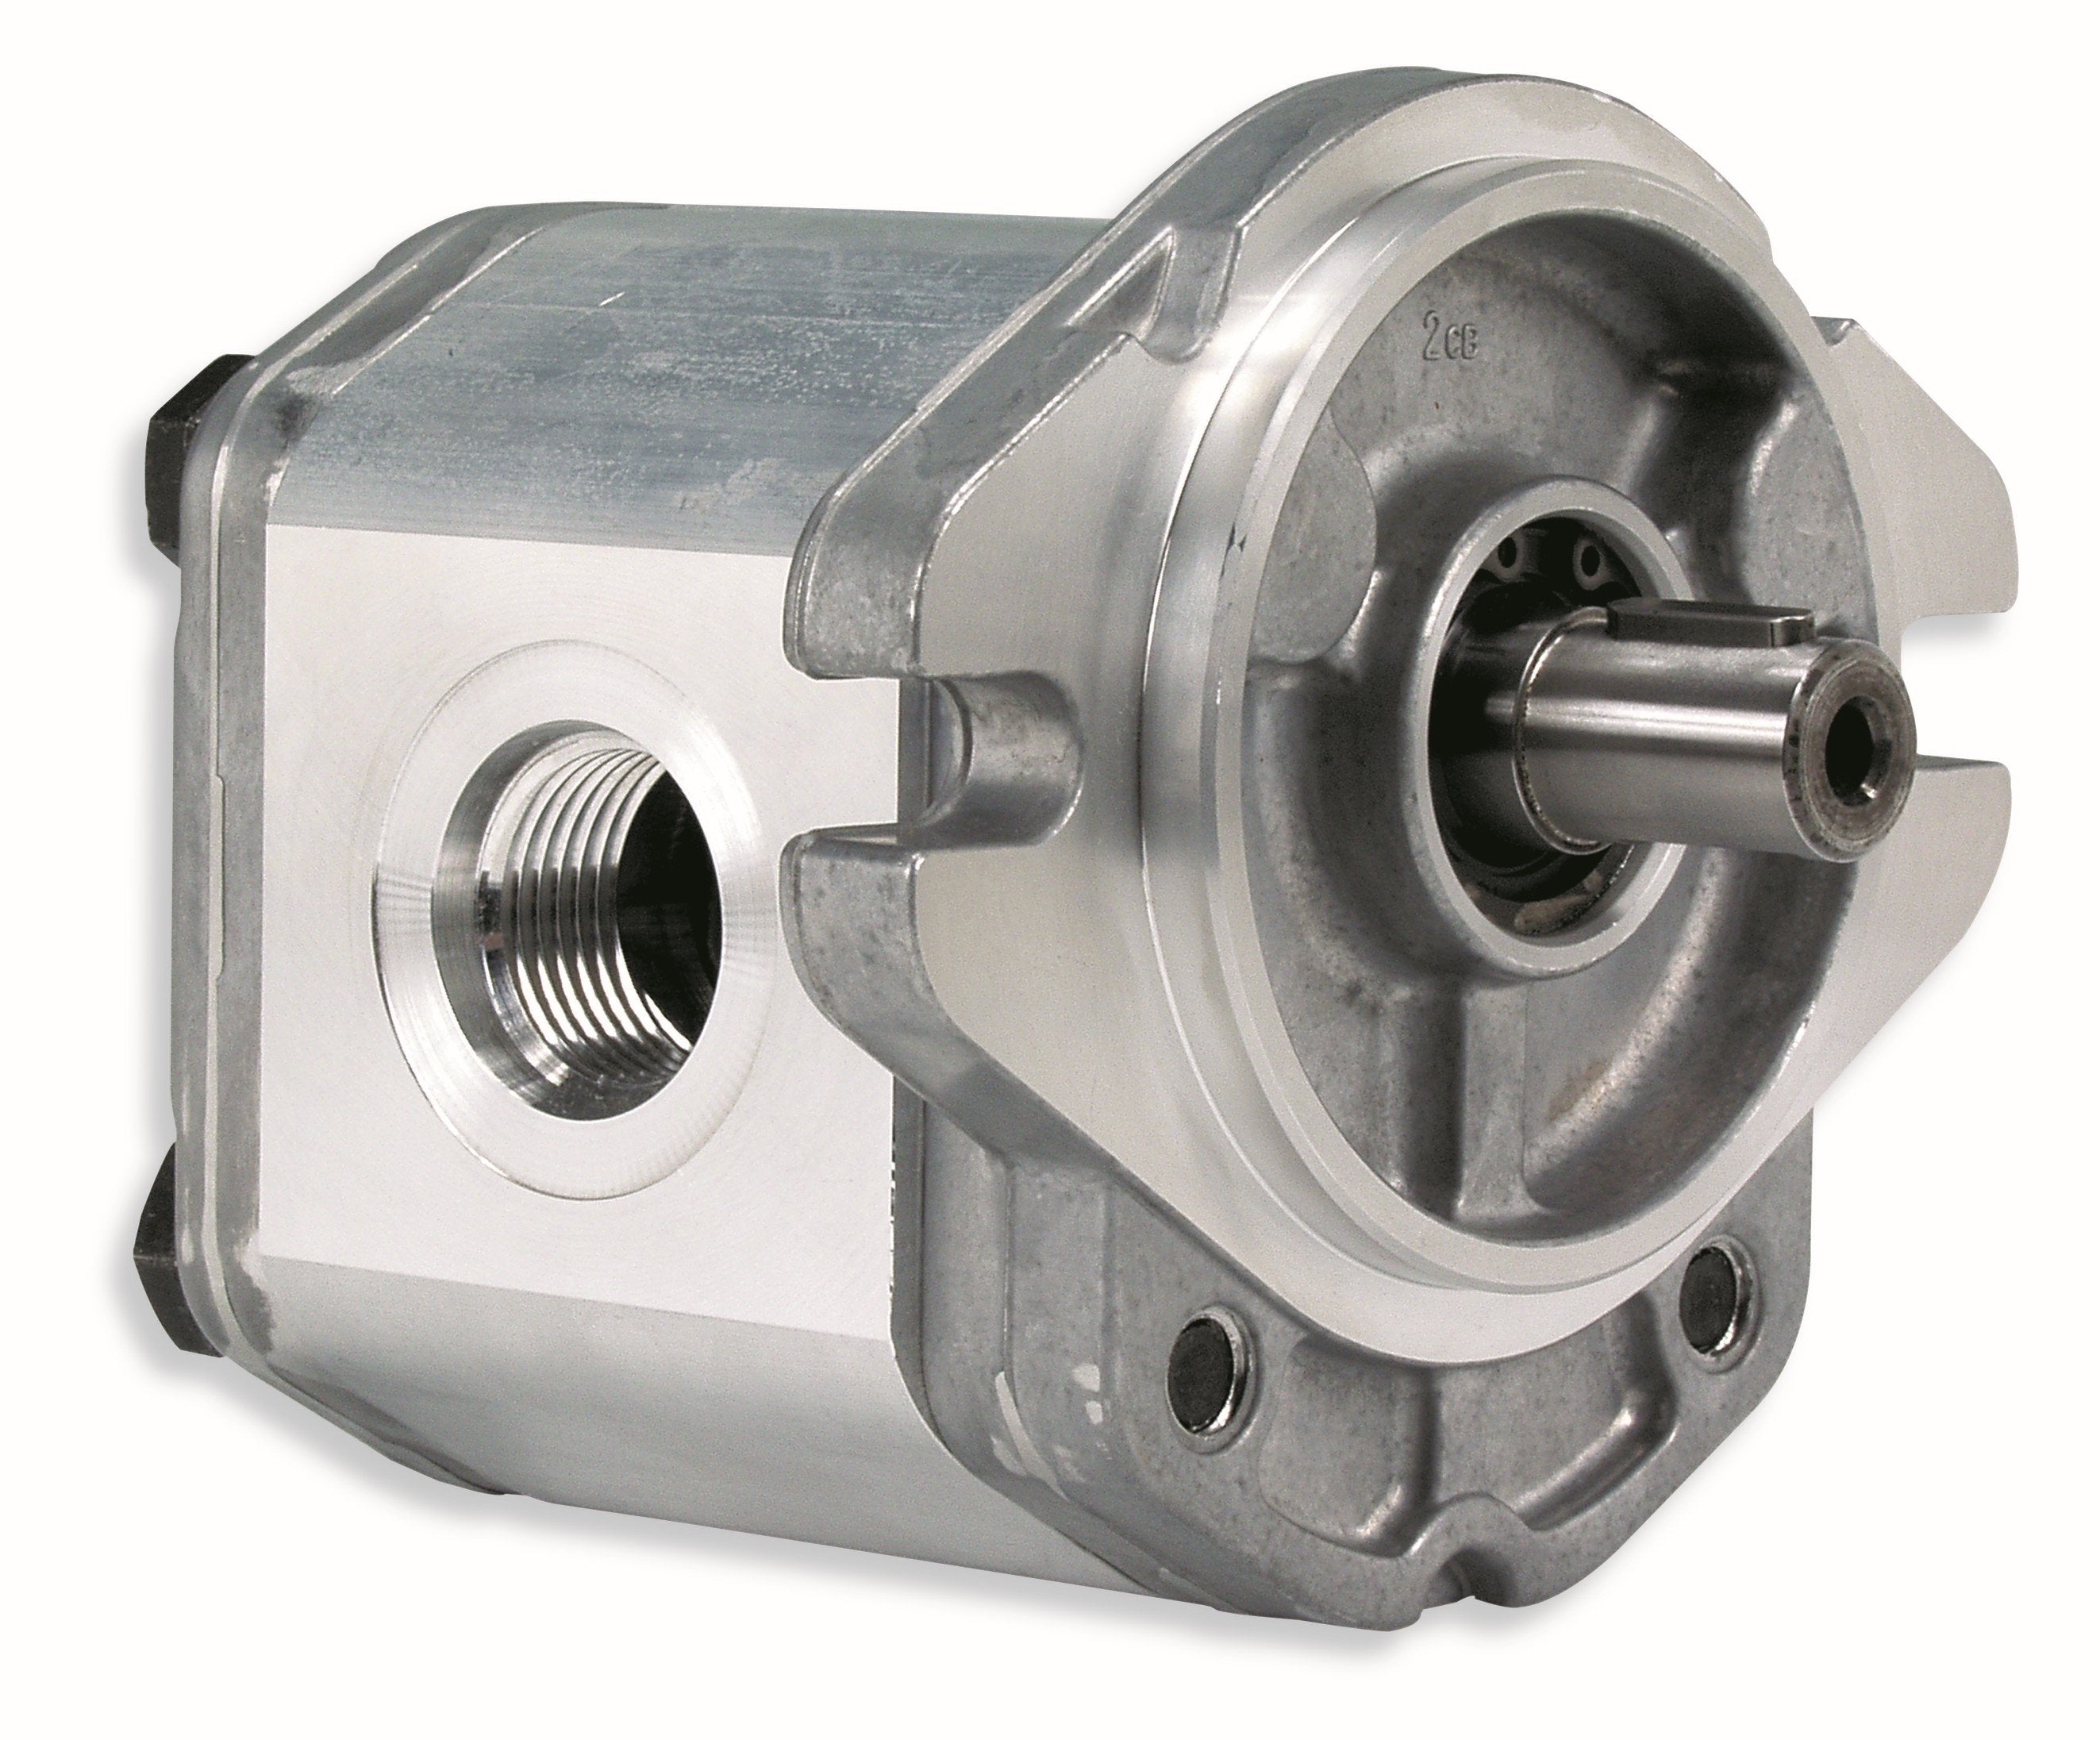 GHM3A-R-33-E4 : Marzocchi Gear Motor, Bidirectional, 22cc, 4060psi rated, 3500RPM, 1" Code 61 ports, 7/8" Bore x 1/4" Keyed Shaft